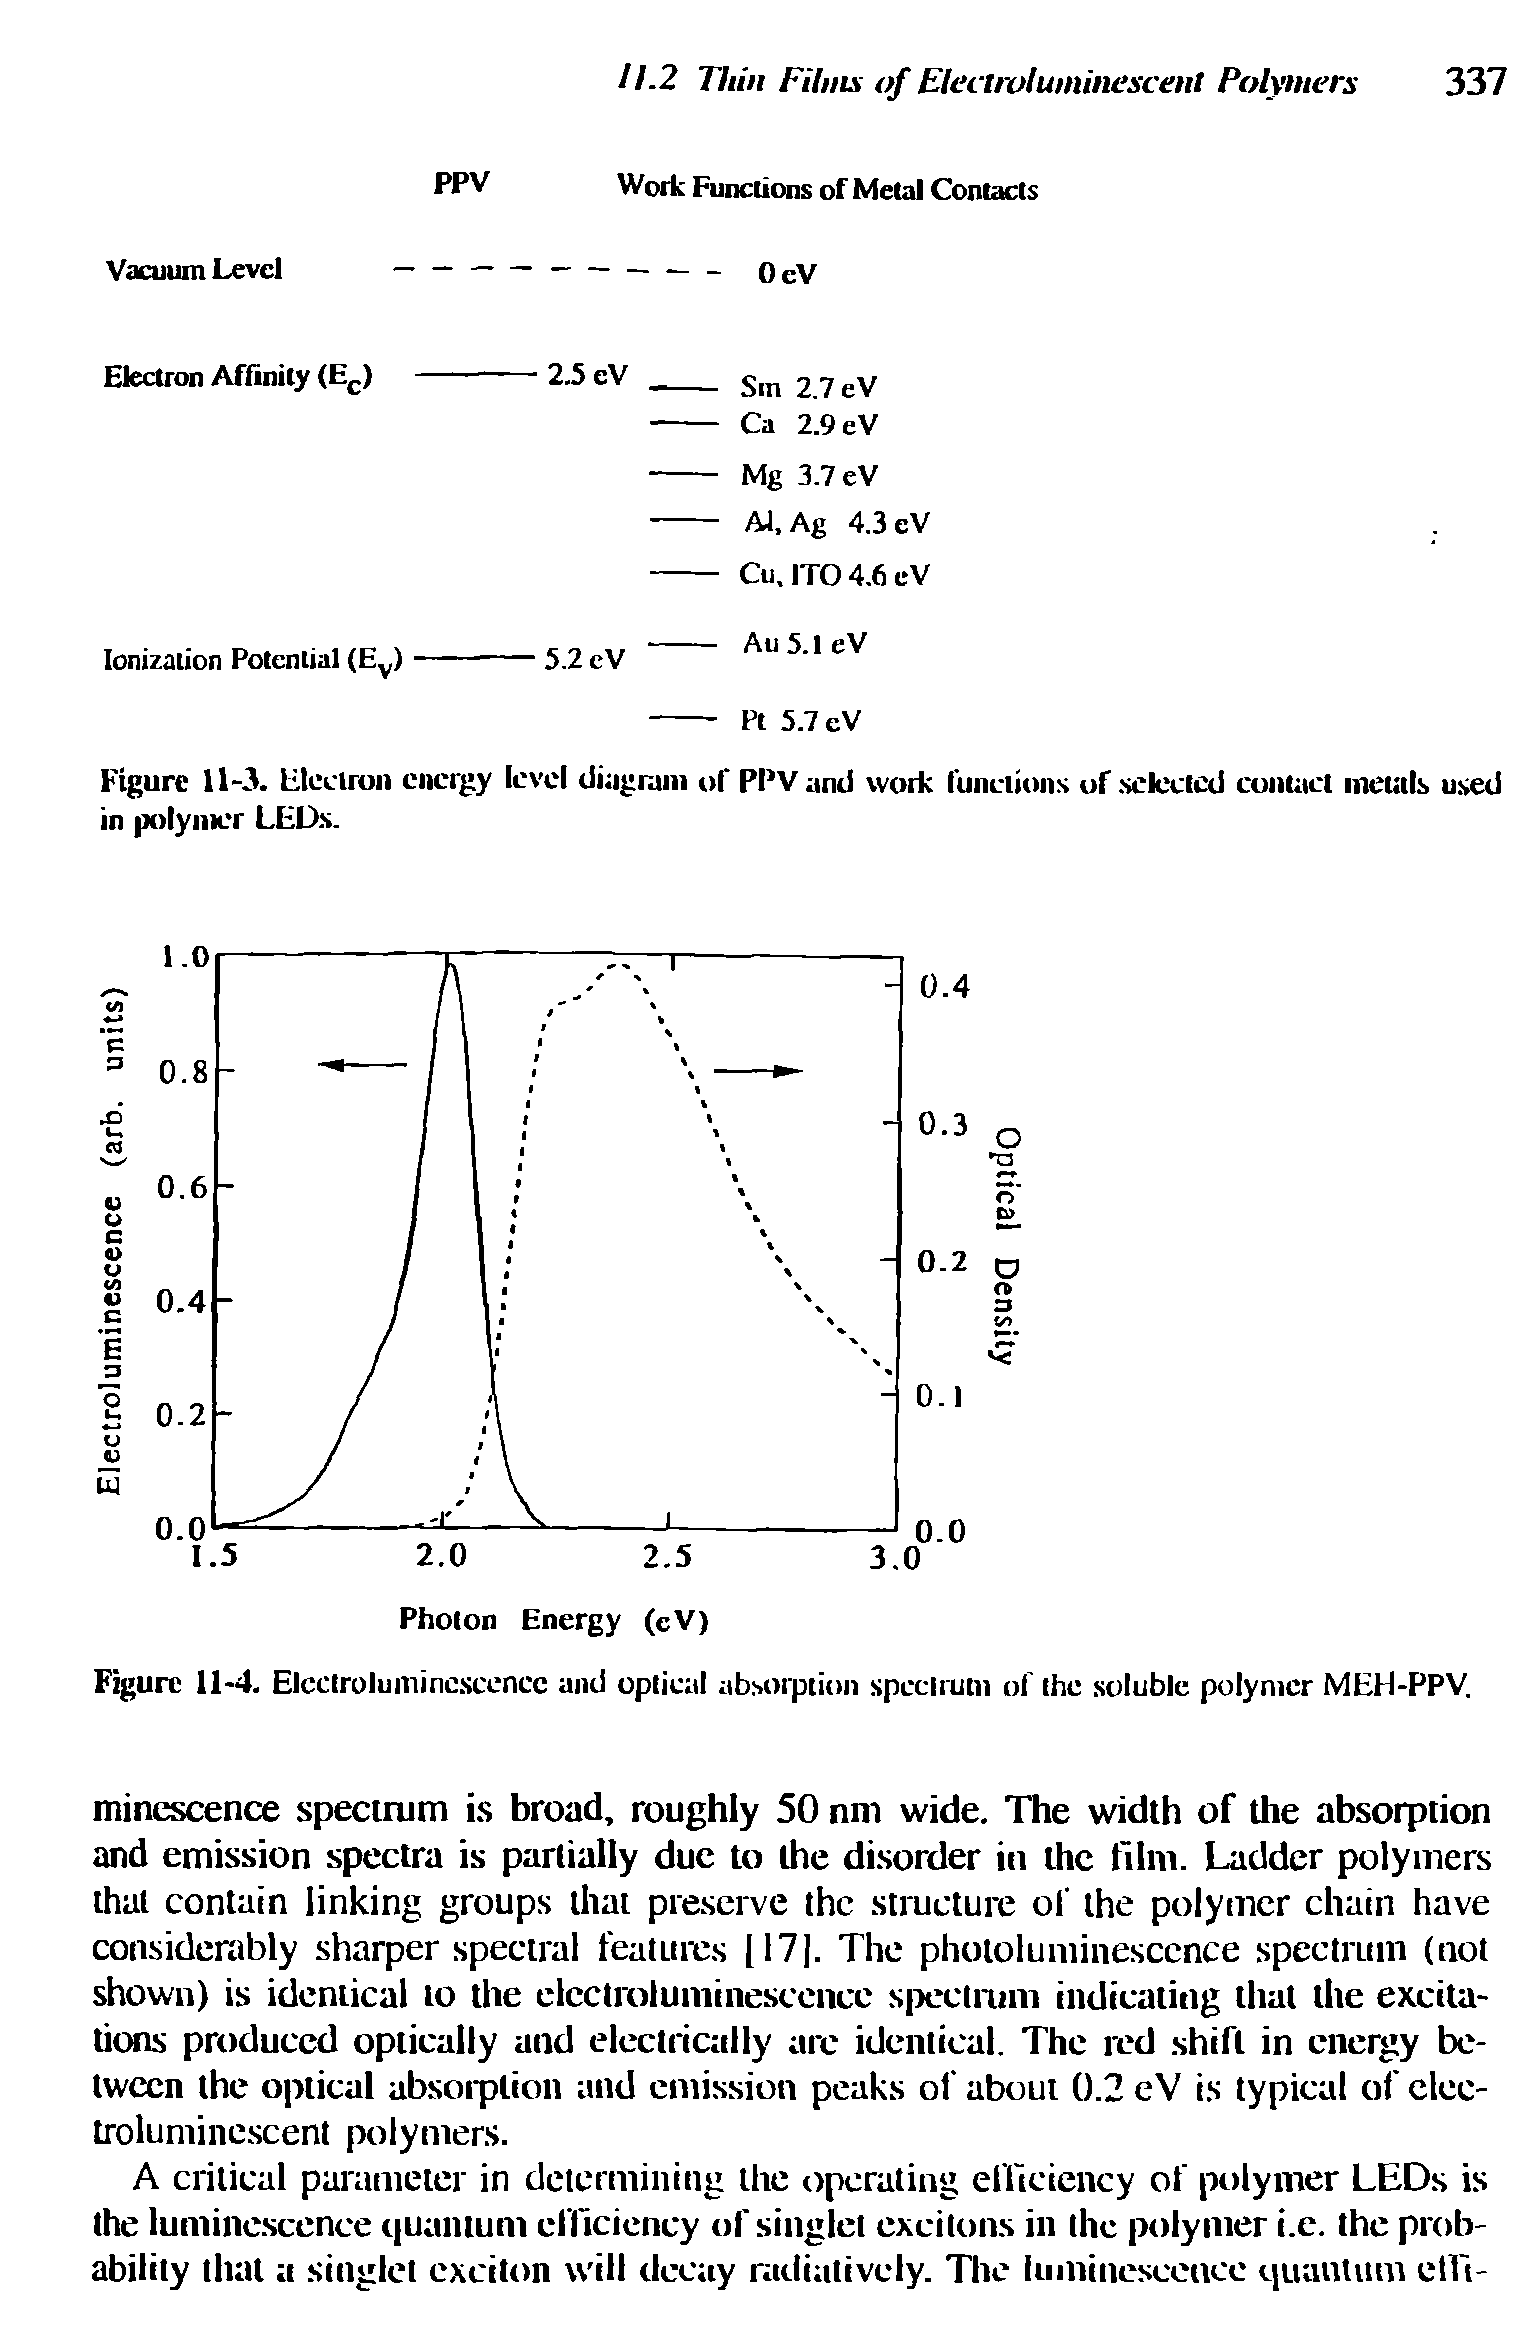 Figure 11-3. Electron energy level diagram of PPV and work functions of selected contael metals used in polymer LEDs.